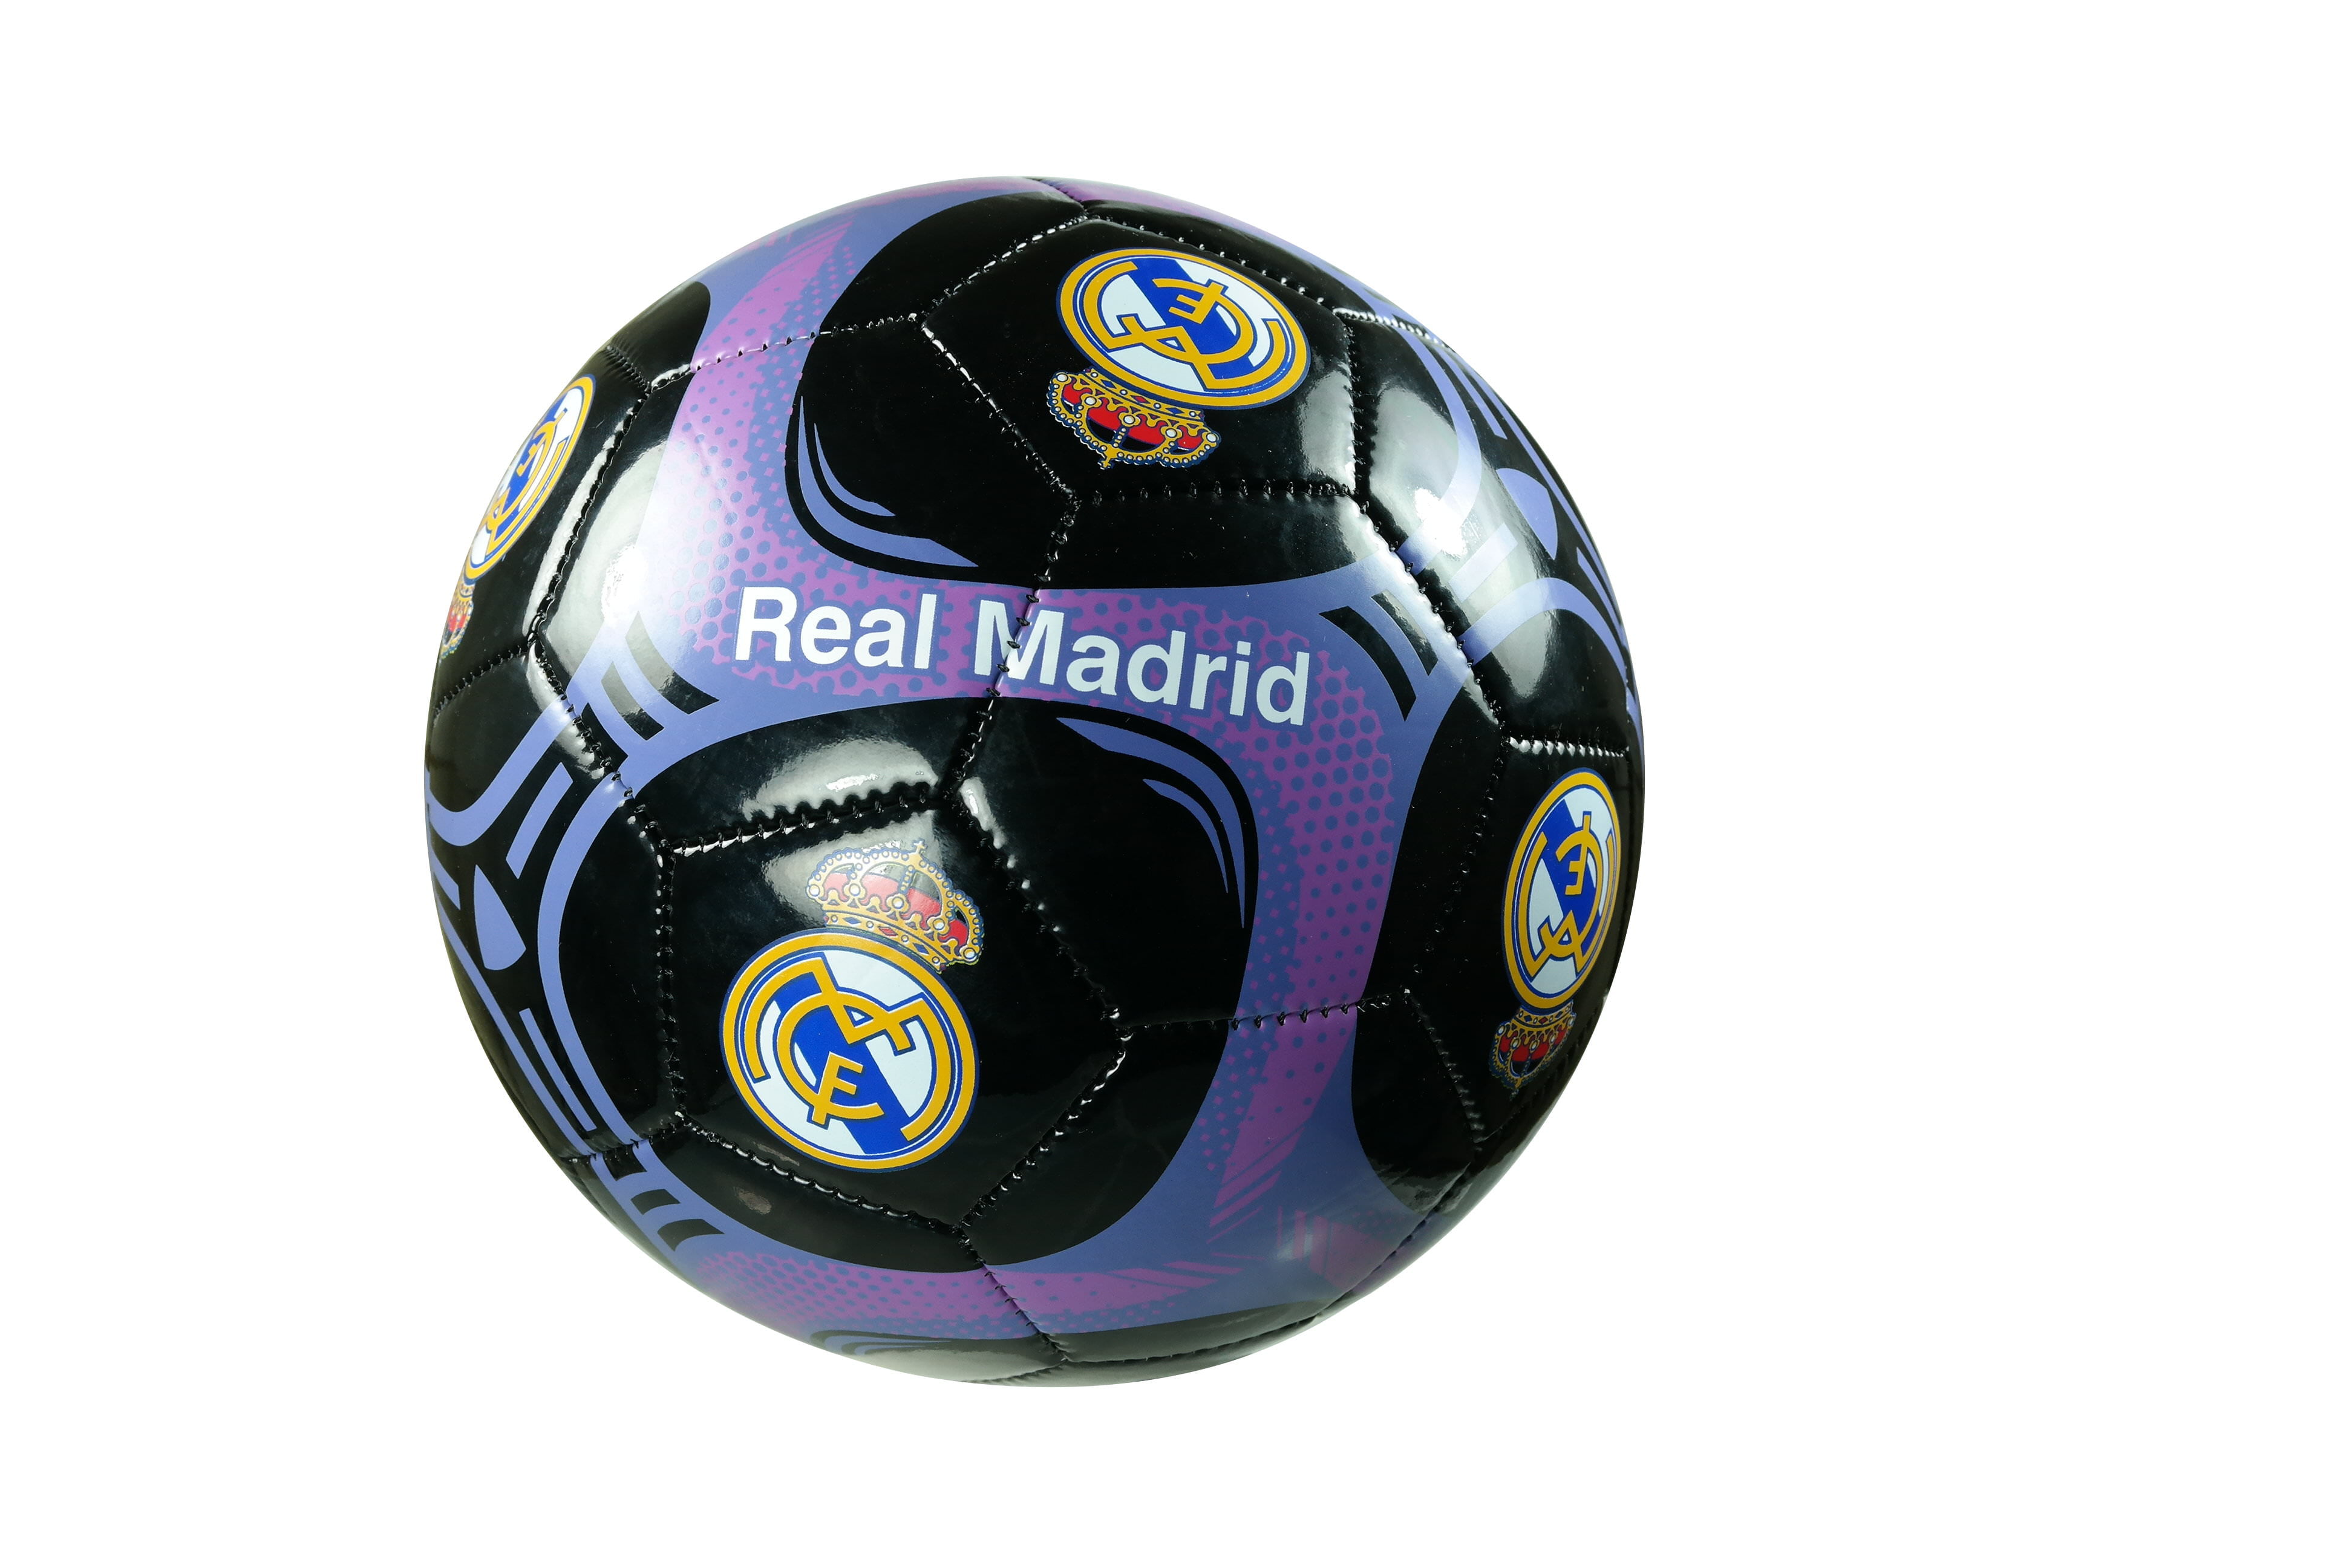 Real Madrid C.F. Authentic Official Licensed Soccer Ball Size 5 -01-2